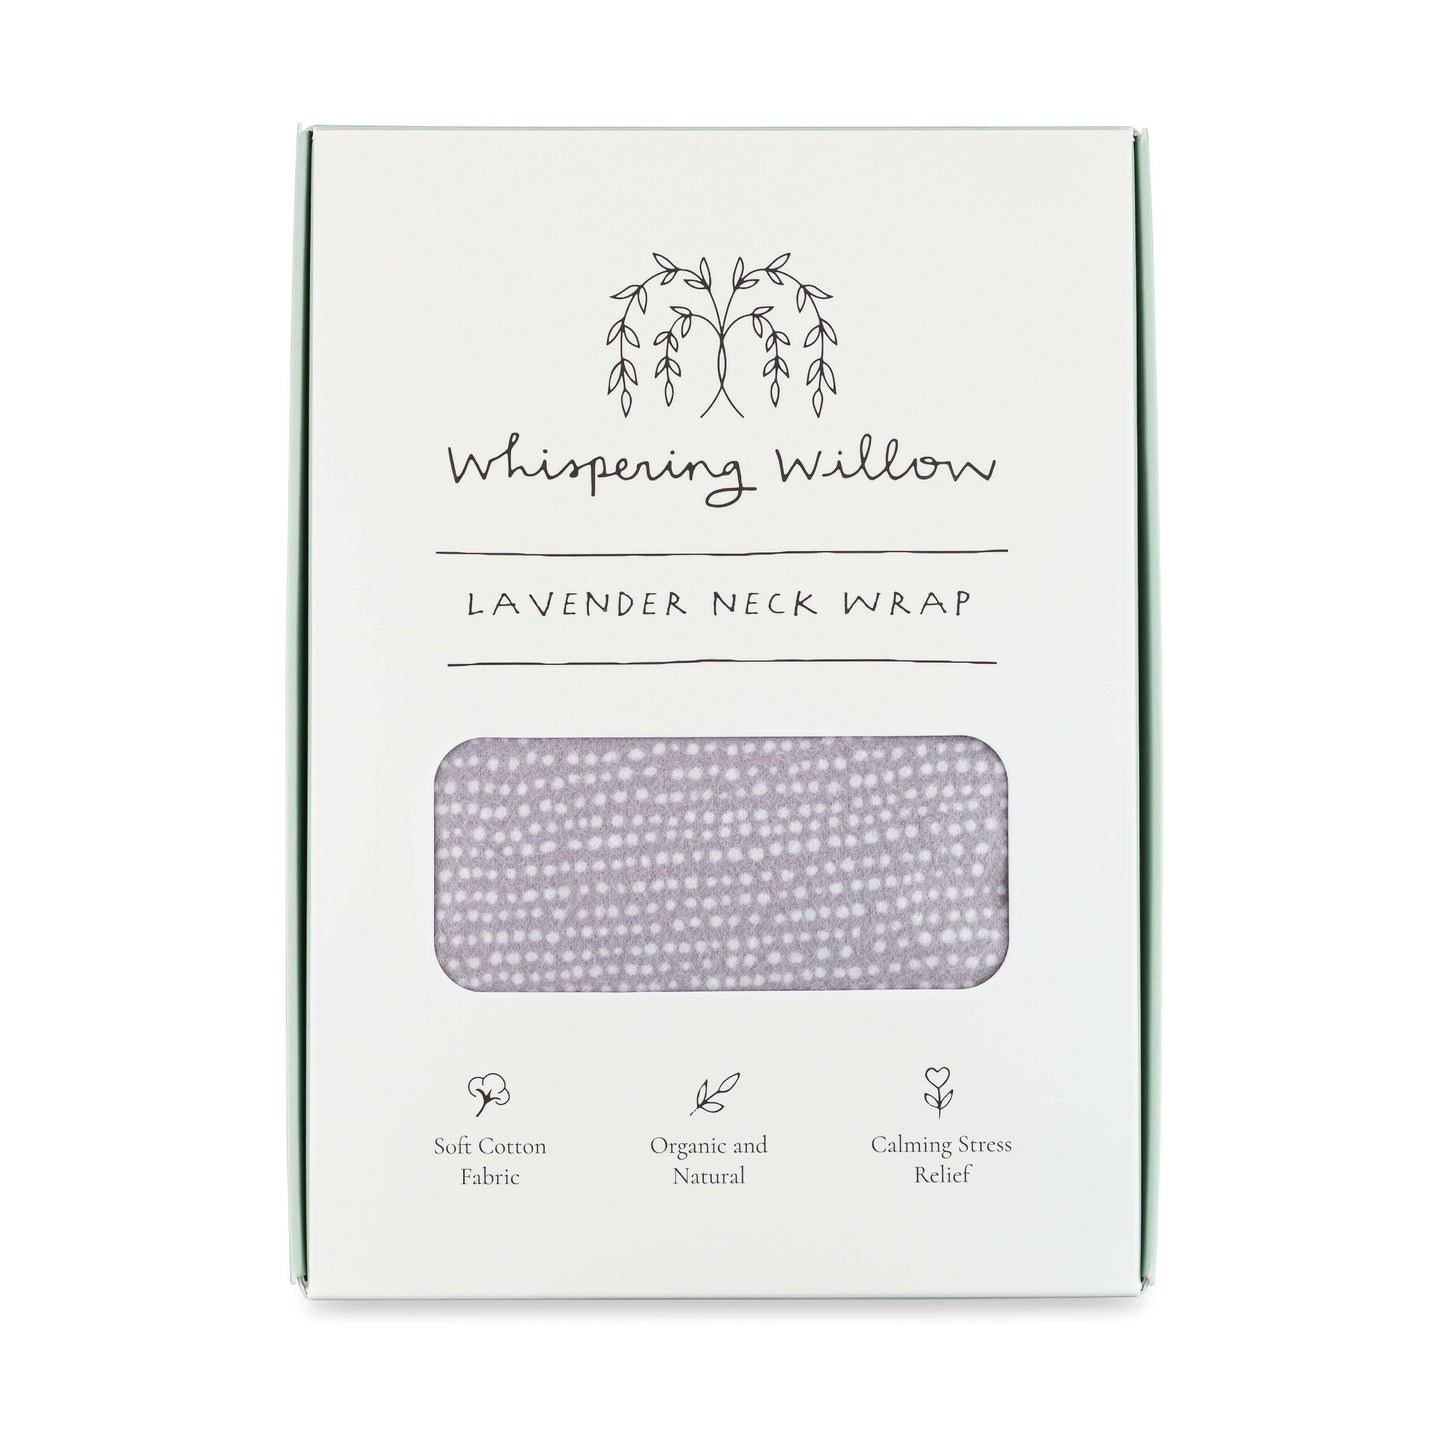 Whispering Willow - Neck Wrap, Lavender - Tranquil Gray - Boxed